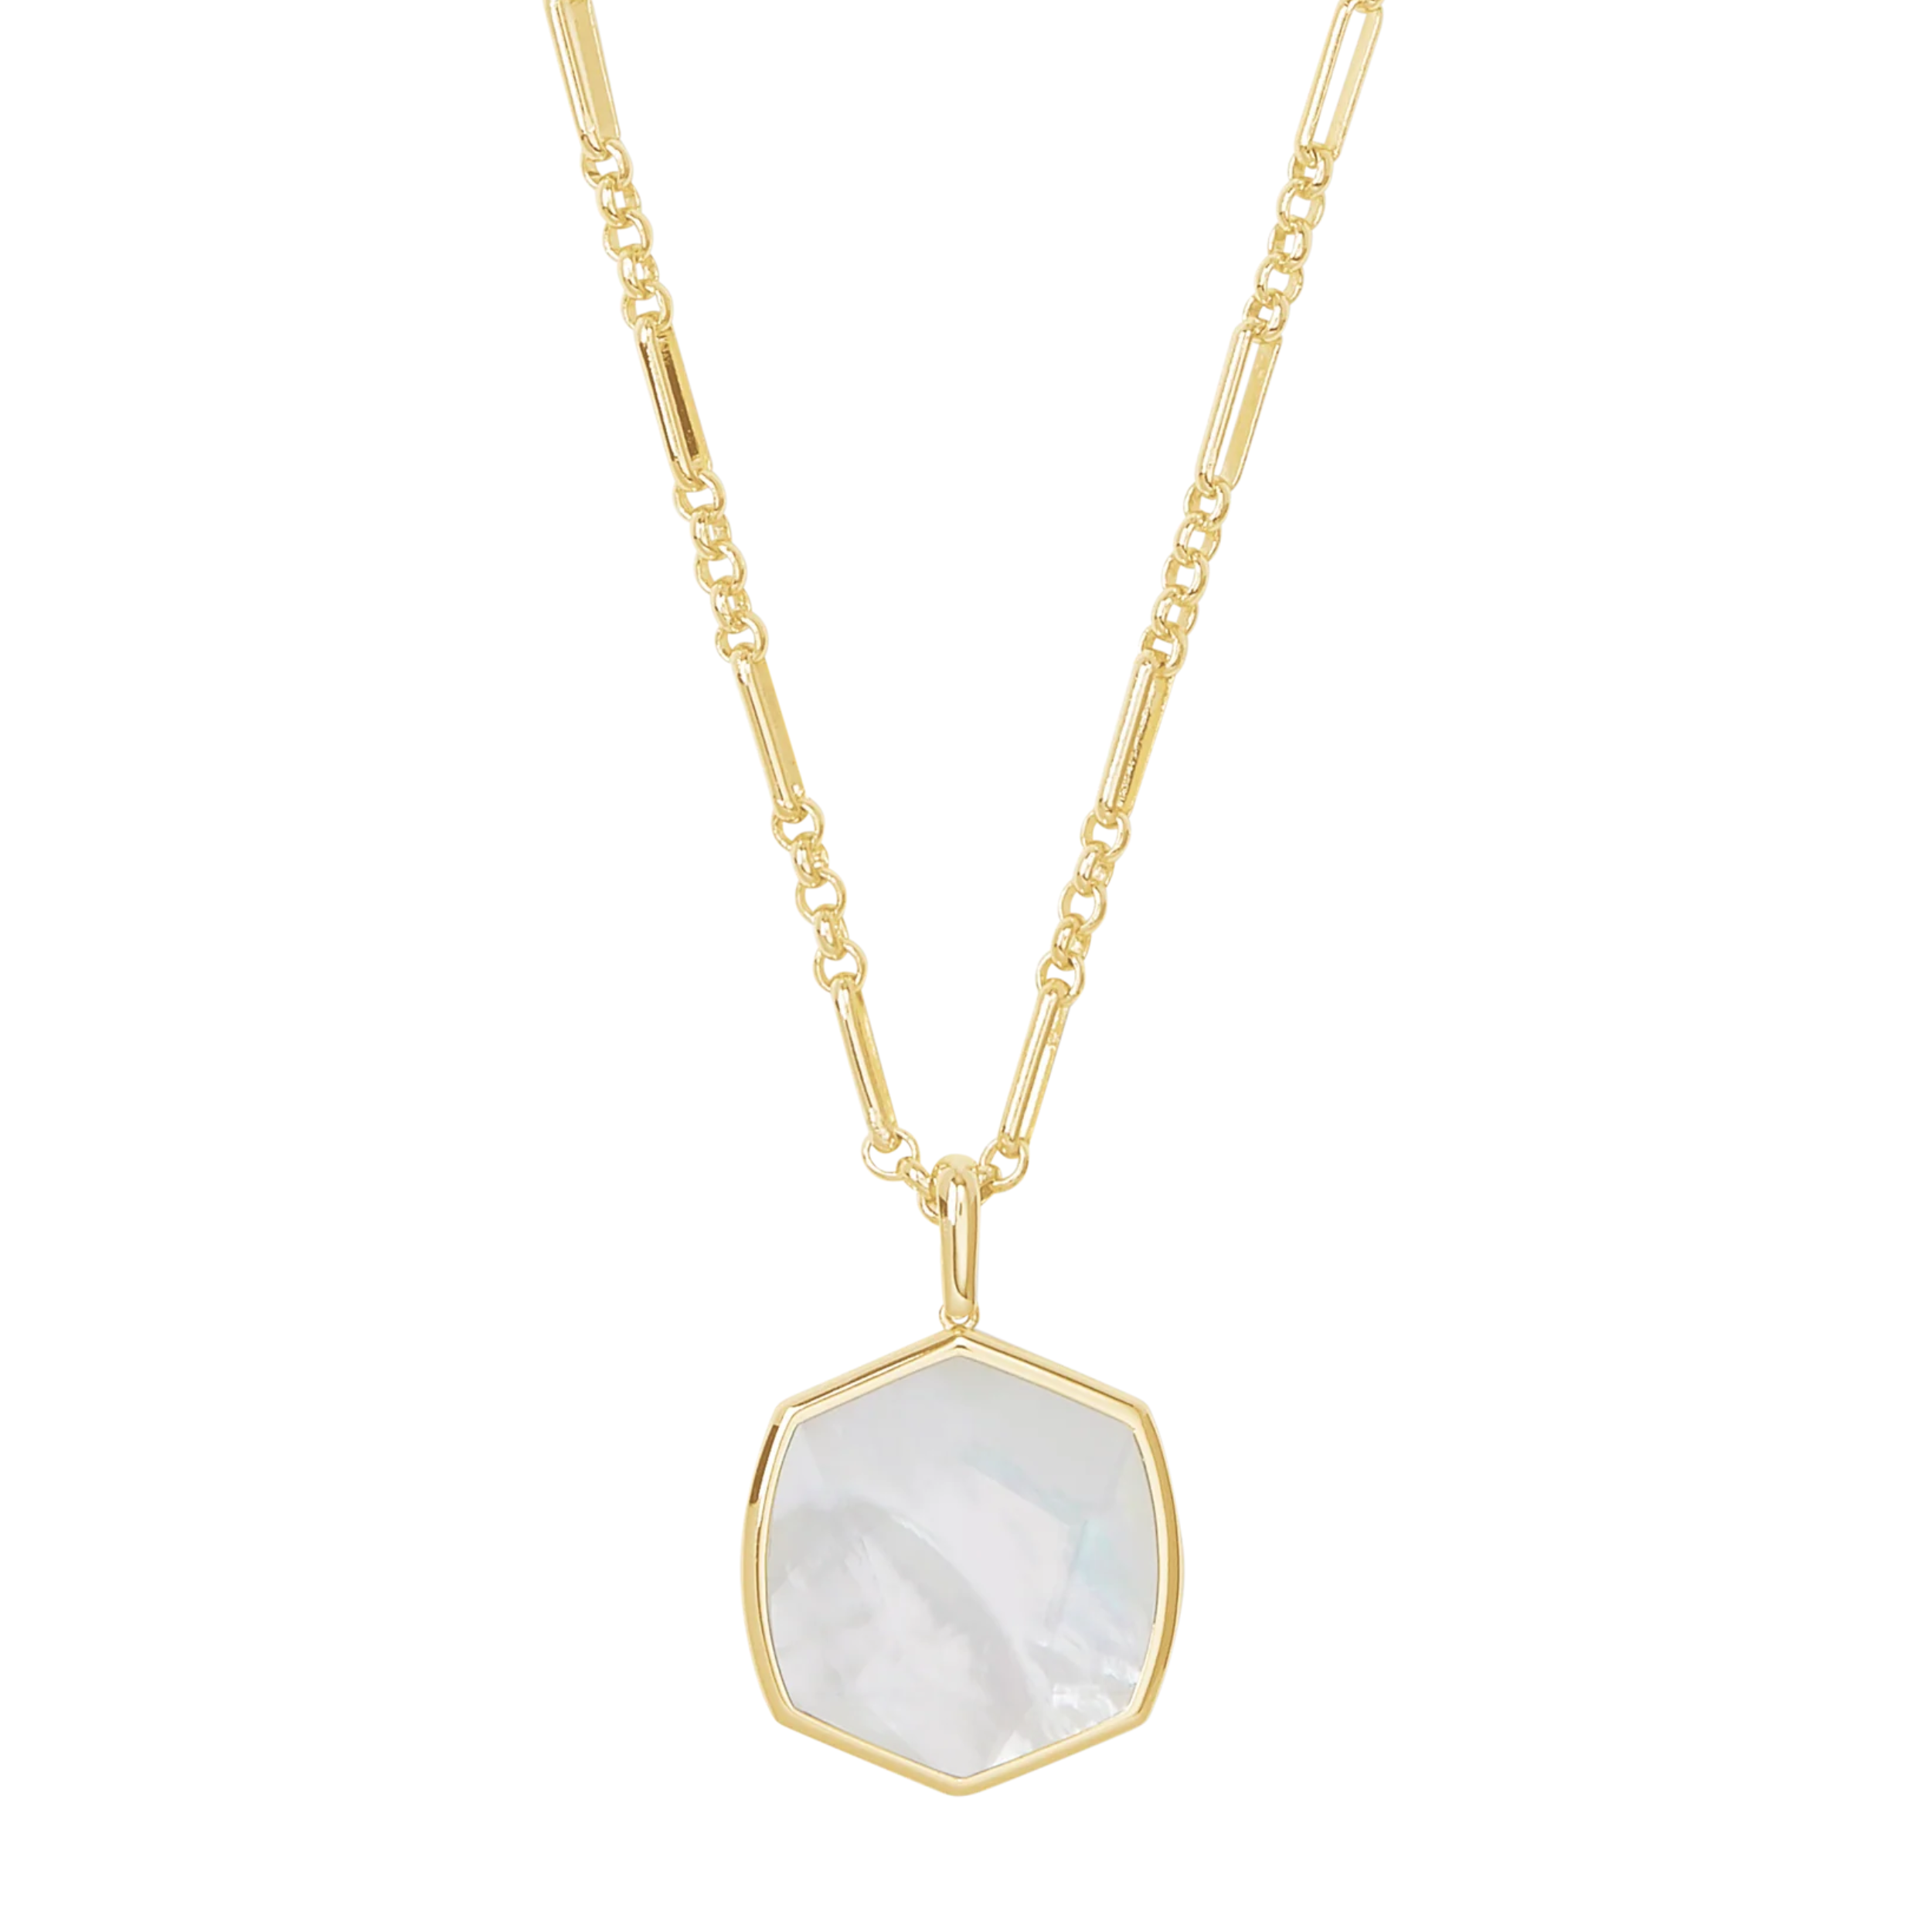 Long gold necklace with a ivory mother of pearl  pendant, pictured on a white background.